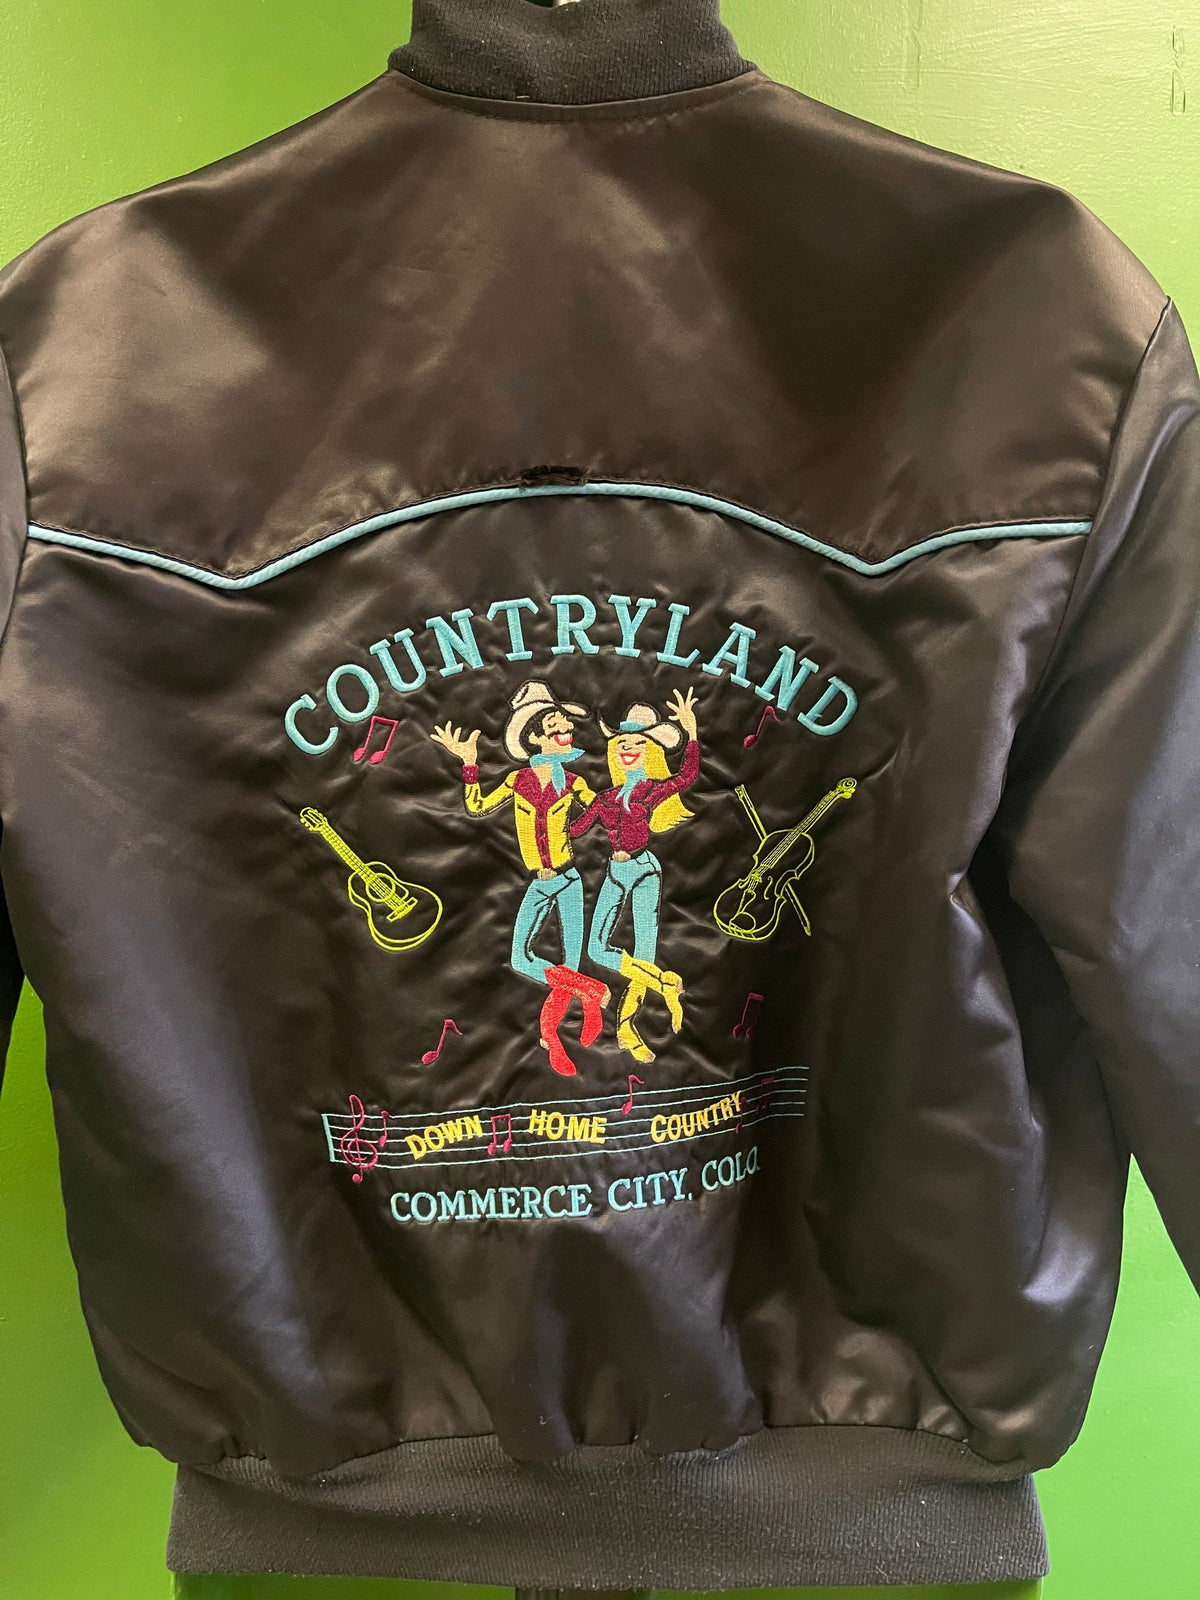 Western "Countryland" Embroidered Satin Bomber Jacket Men's Small